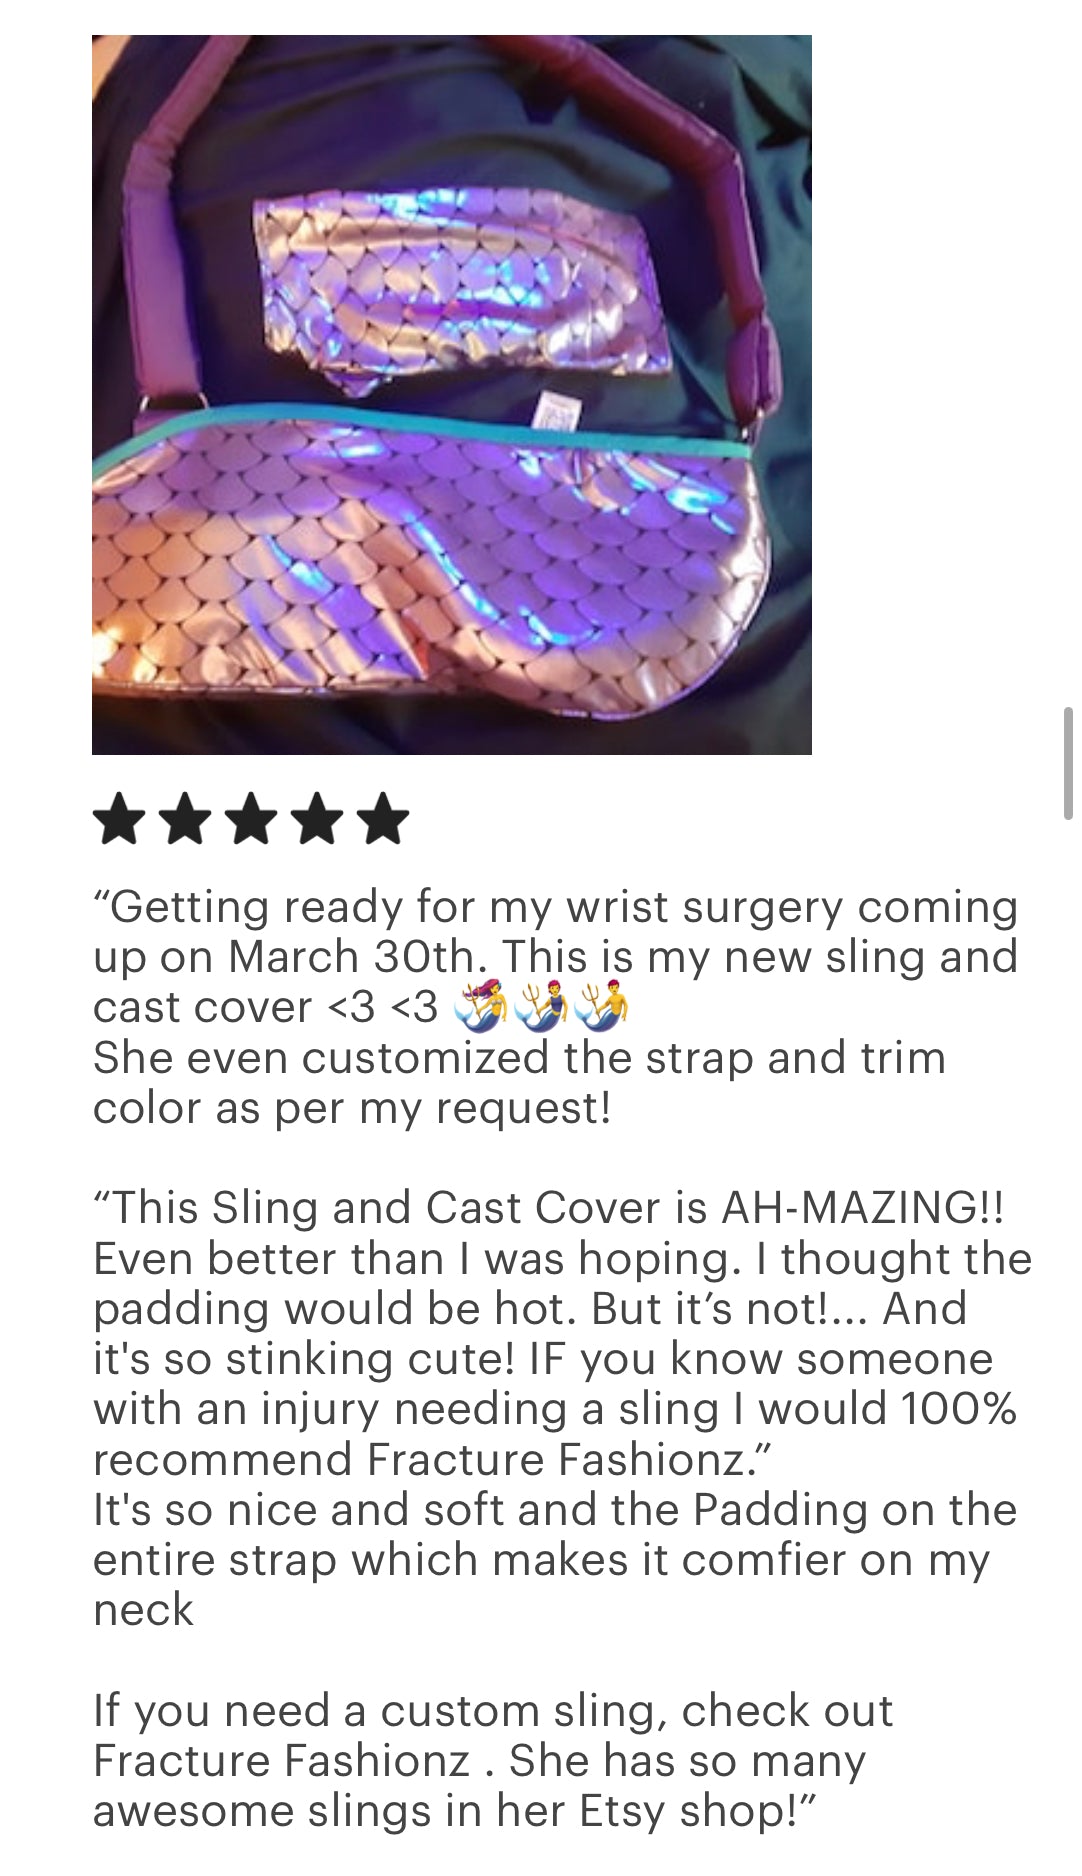 Mermaid Scales Cast Cover